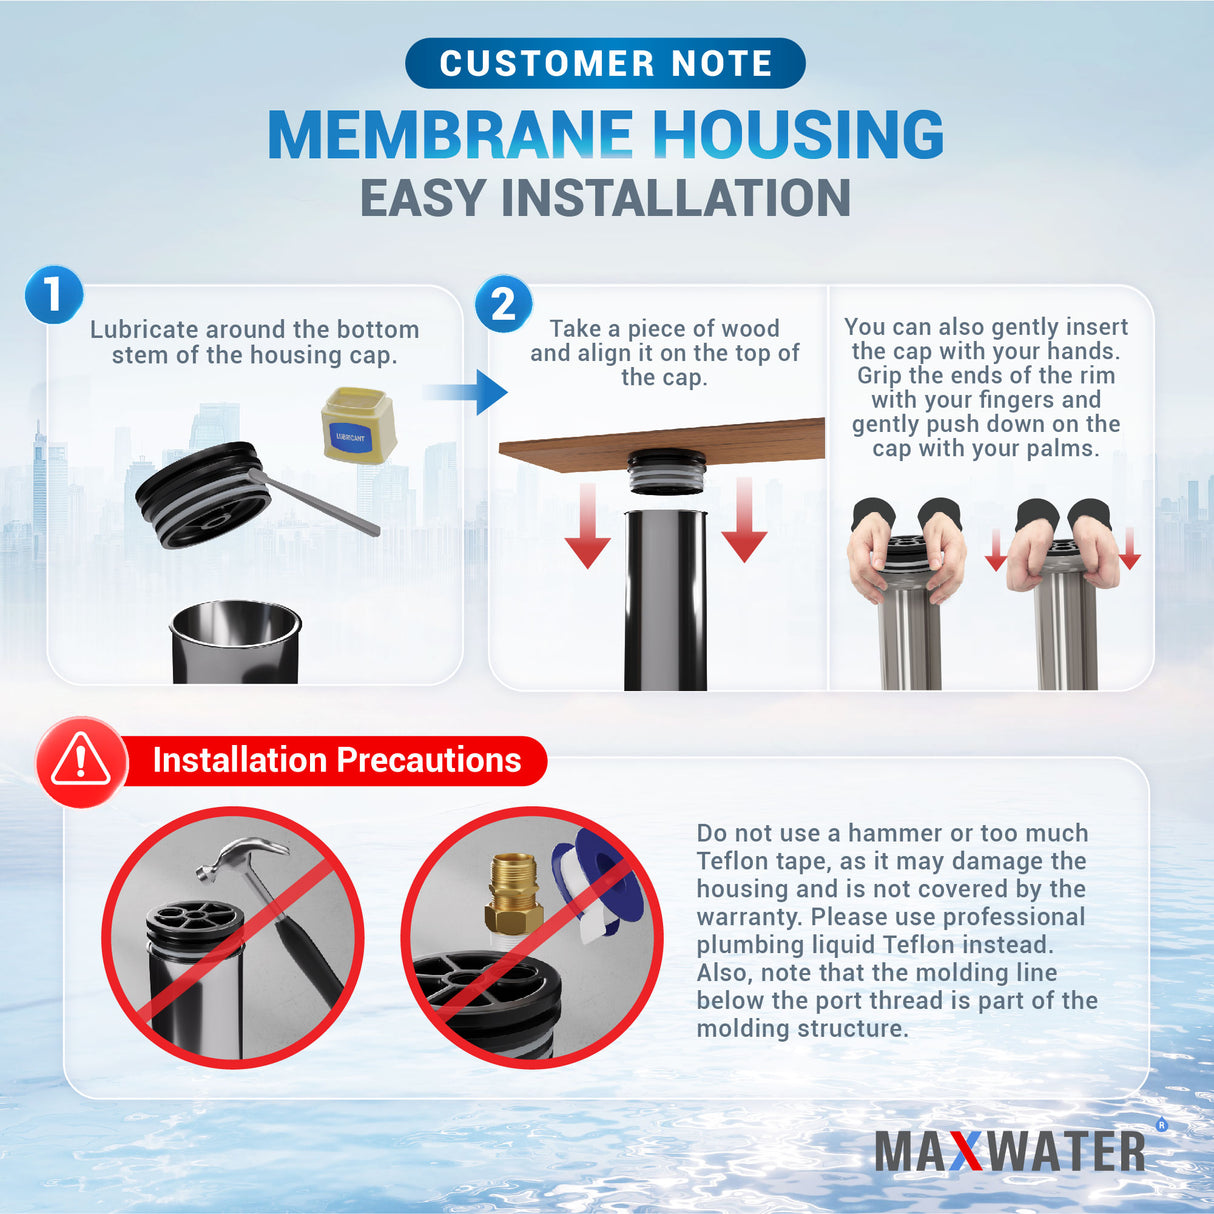 Trusted in commercial settings, the 4021 RO membrane housing stands out for its reliability and industry-leading performance